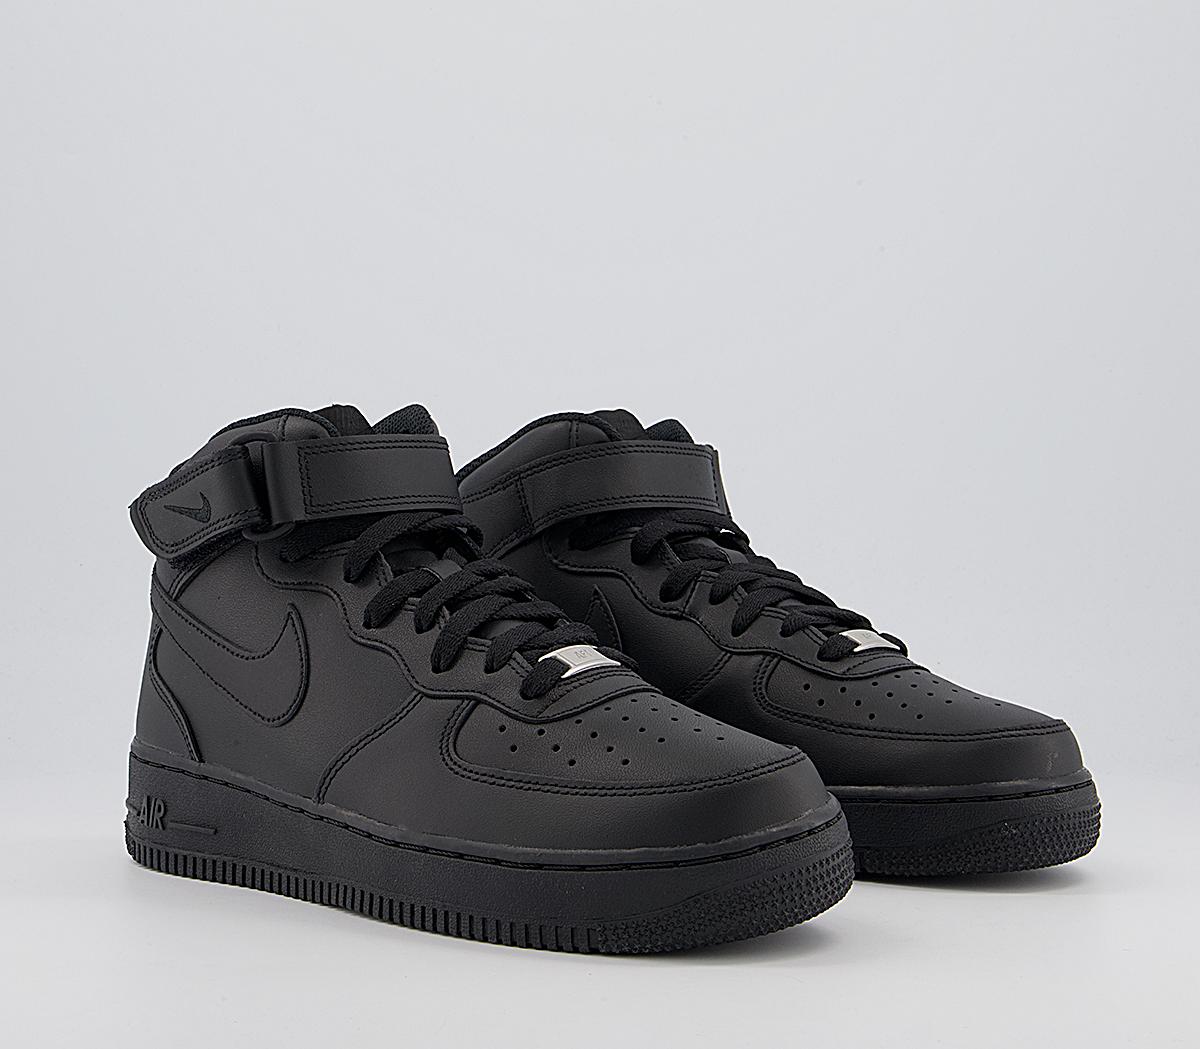 Nike Air Force 1 Mid Trainers Black - Unisex Sports